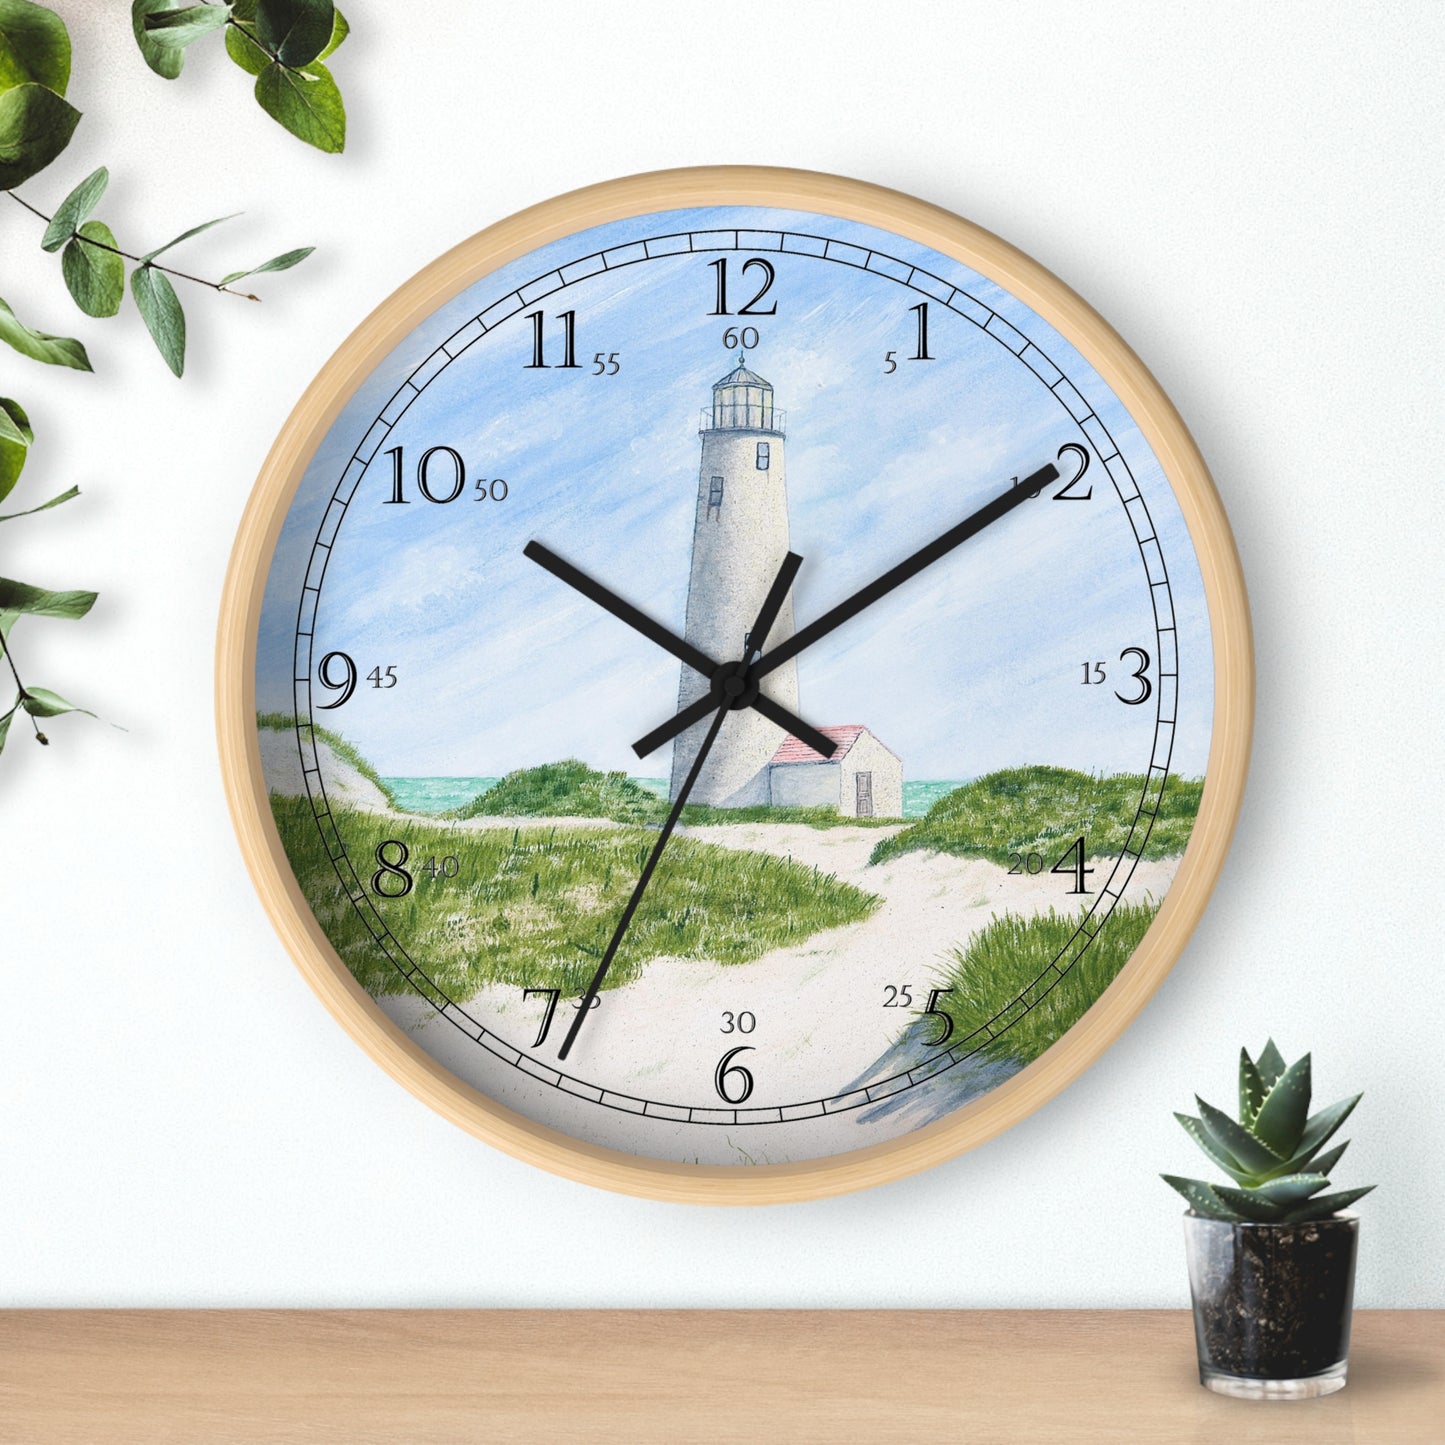 Dunes At Great Point Light English Numeral Clock